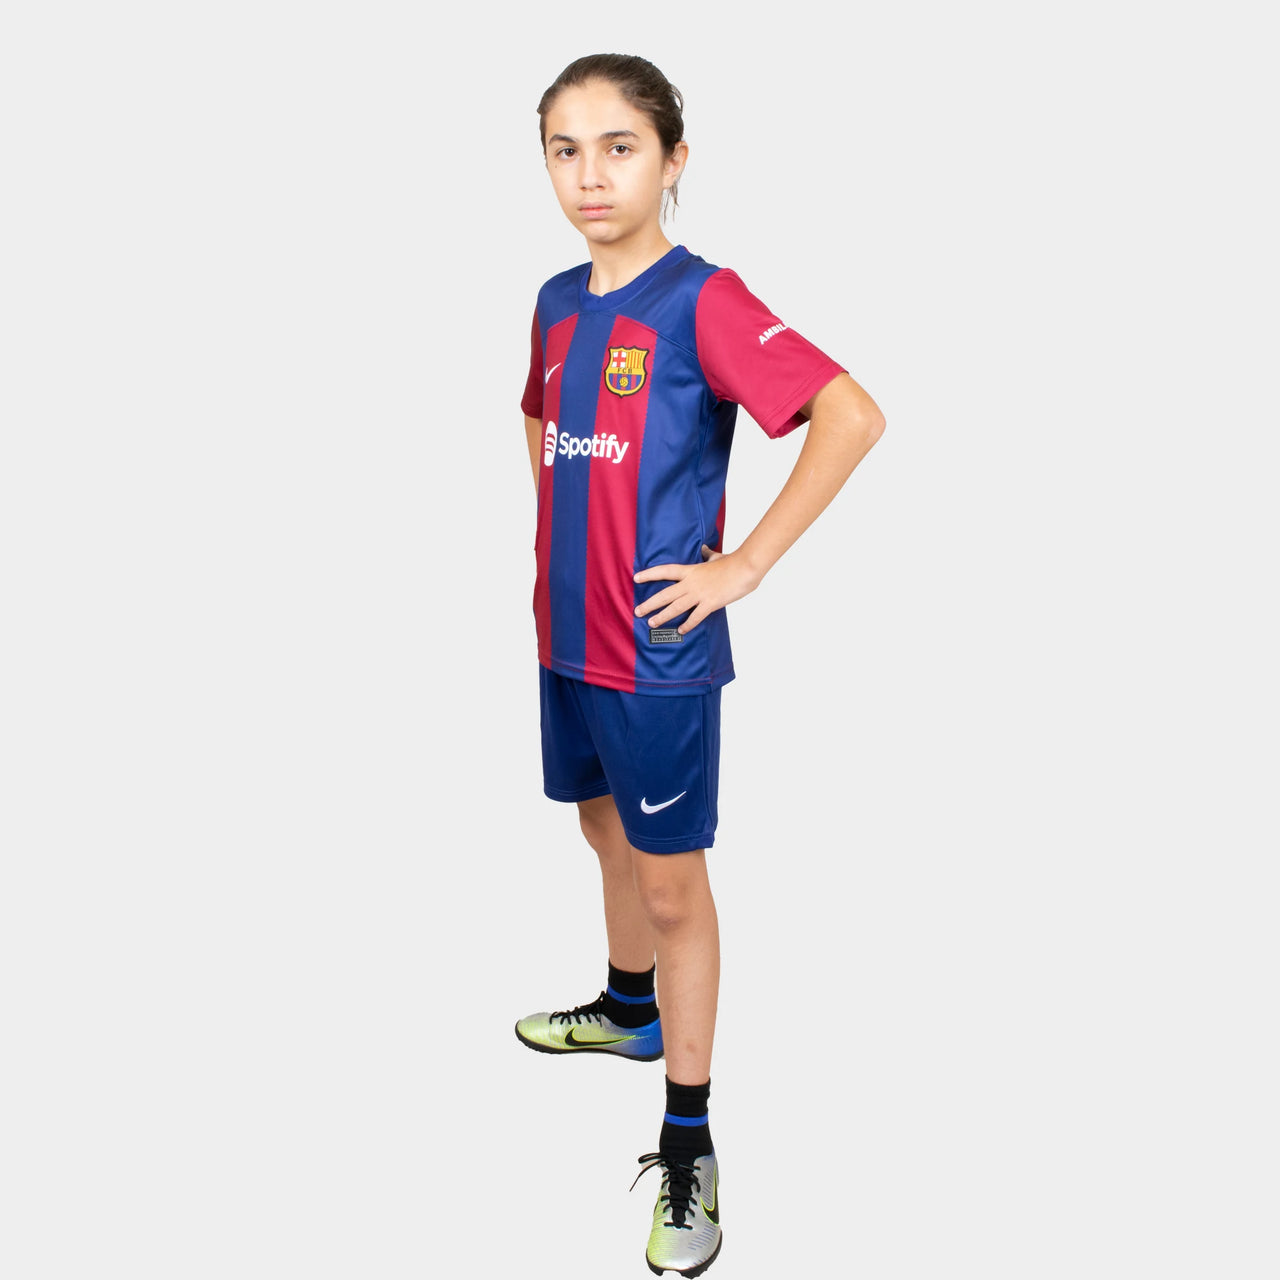 Barcelona Kids Kit Home Season 23/24 Designed By Mitani Store , Regular Fit Jersey Short Sleeves And Round Neck Collar In Blue And Red Color